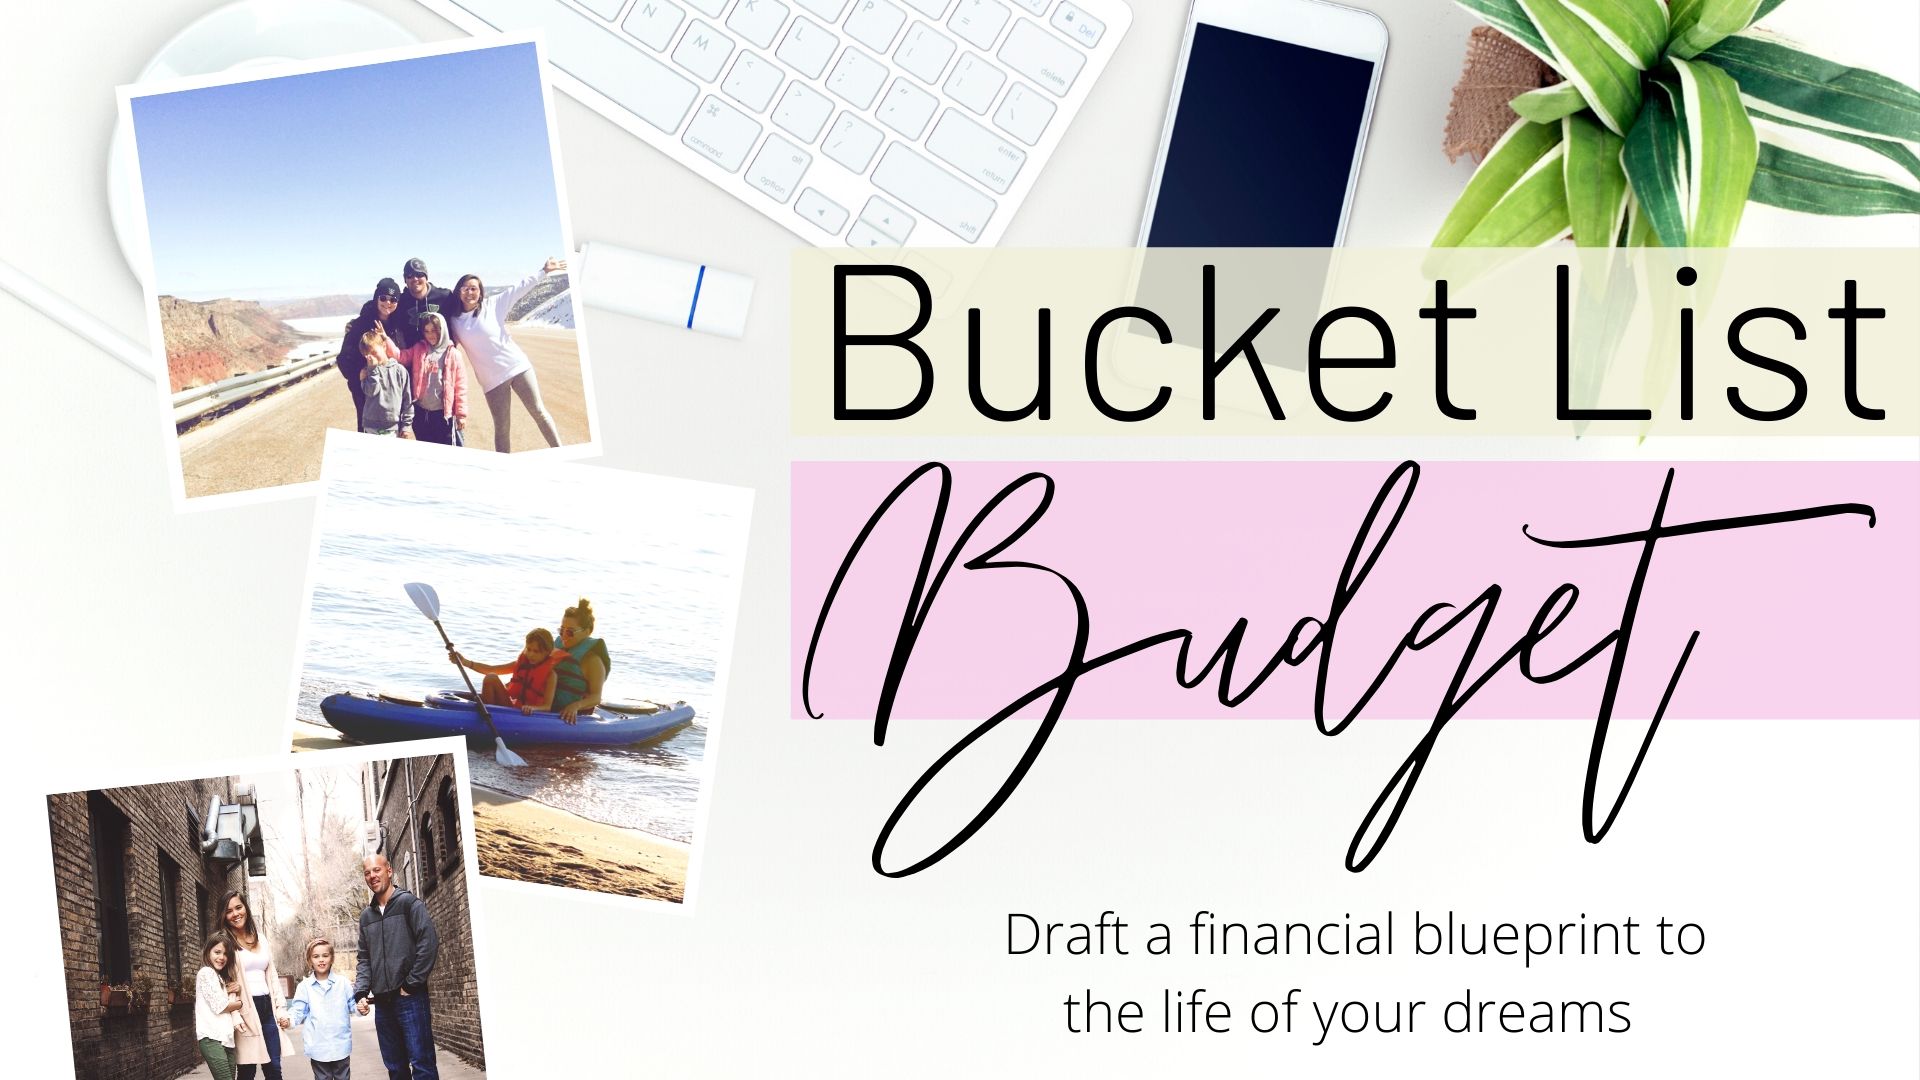 Basic Rich Budget Hacking Money Course - The Fun Sized Life